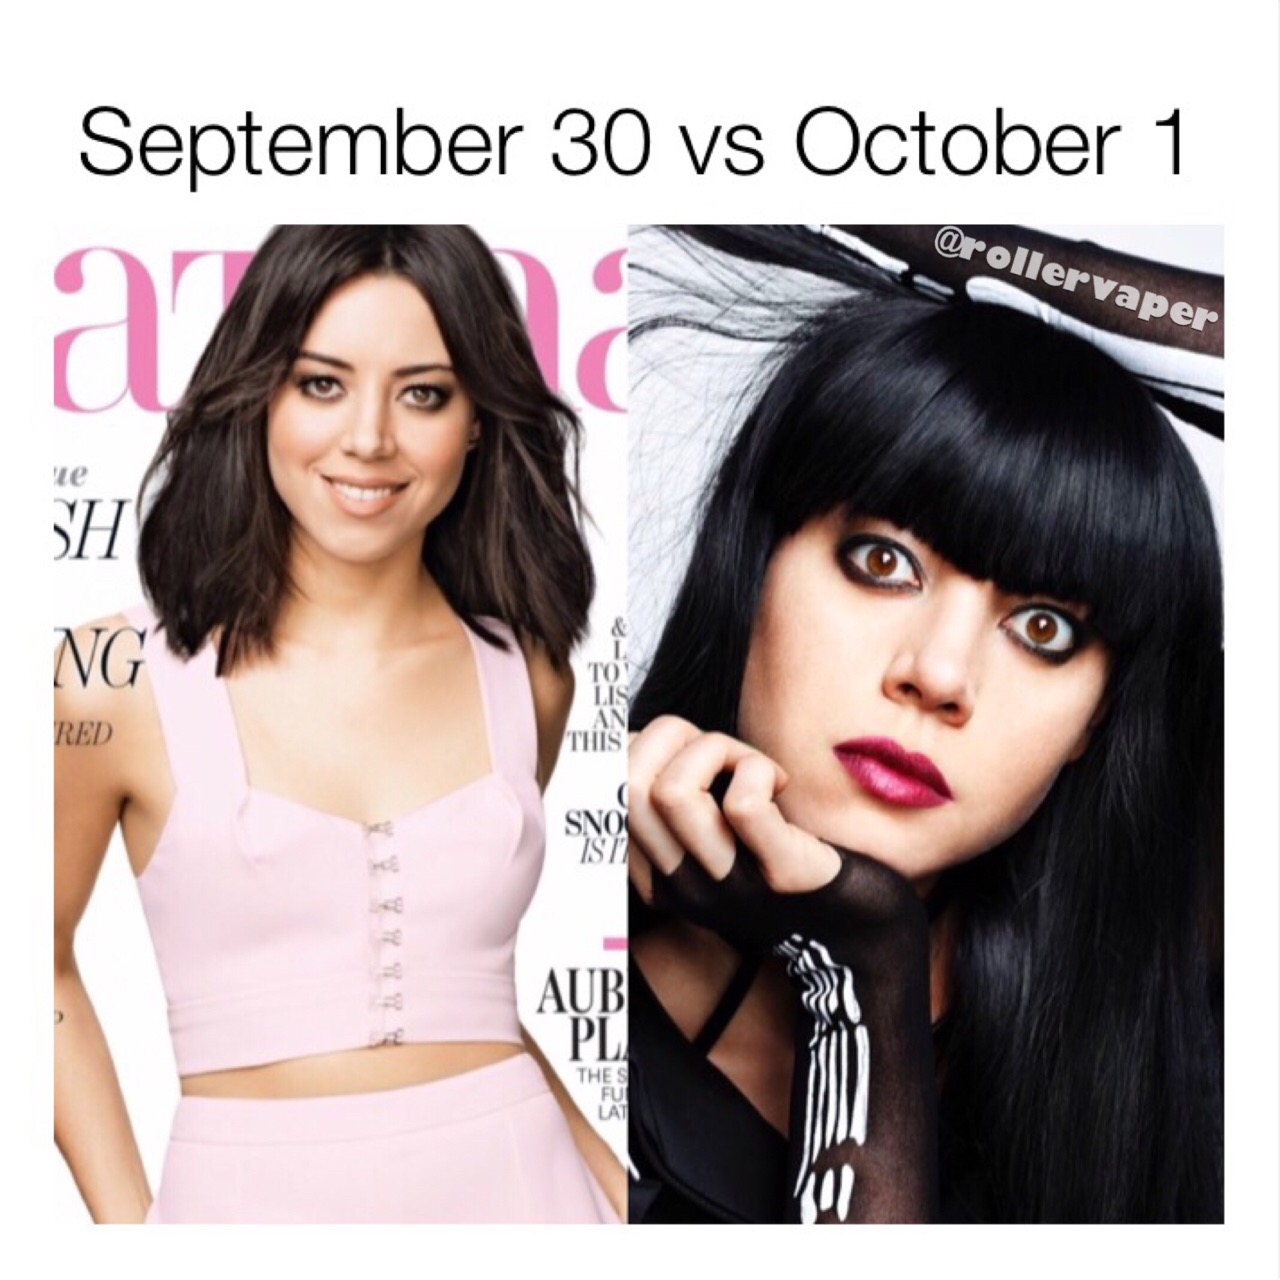 aubrey plaza goth - September 30 vs October 1 Sh Red An His Aub The S Fu Lat